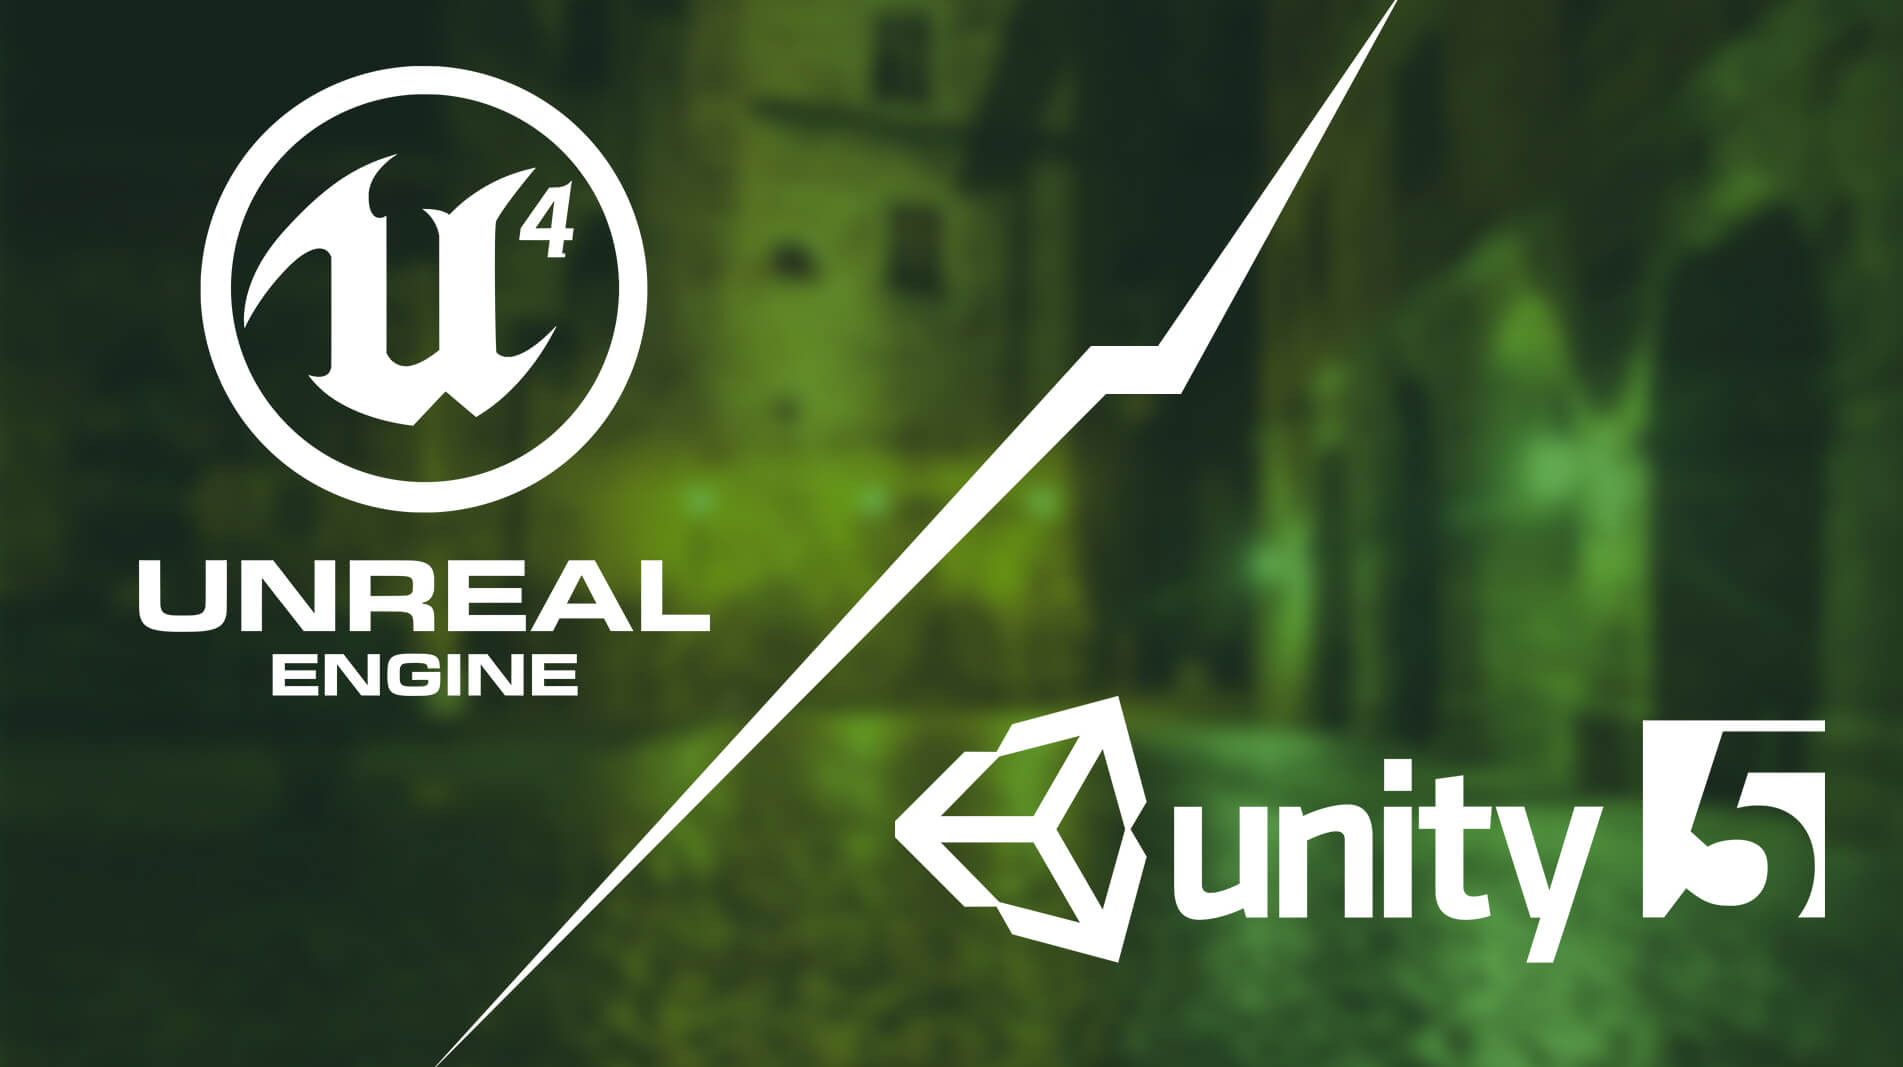 Unreal Engine vs Unity 3D Games Development: What to Choose?